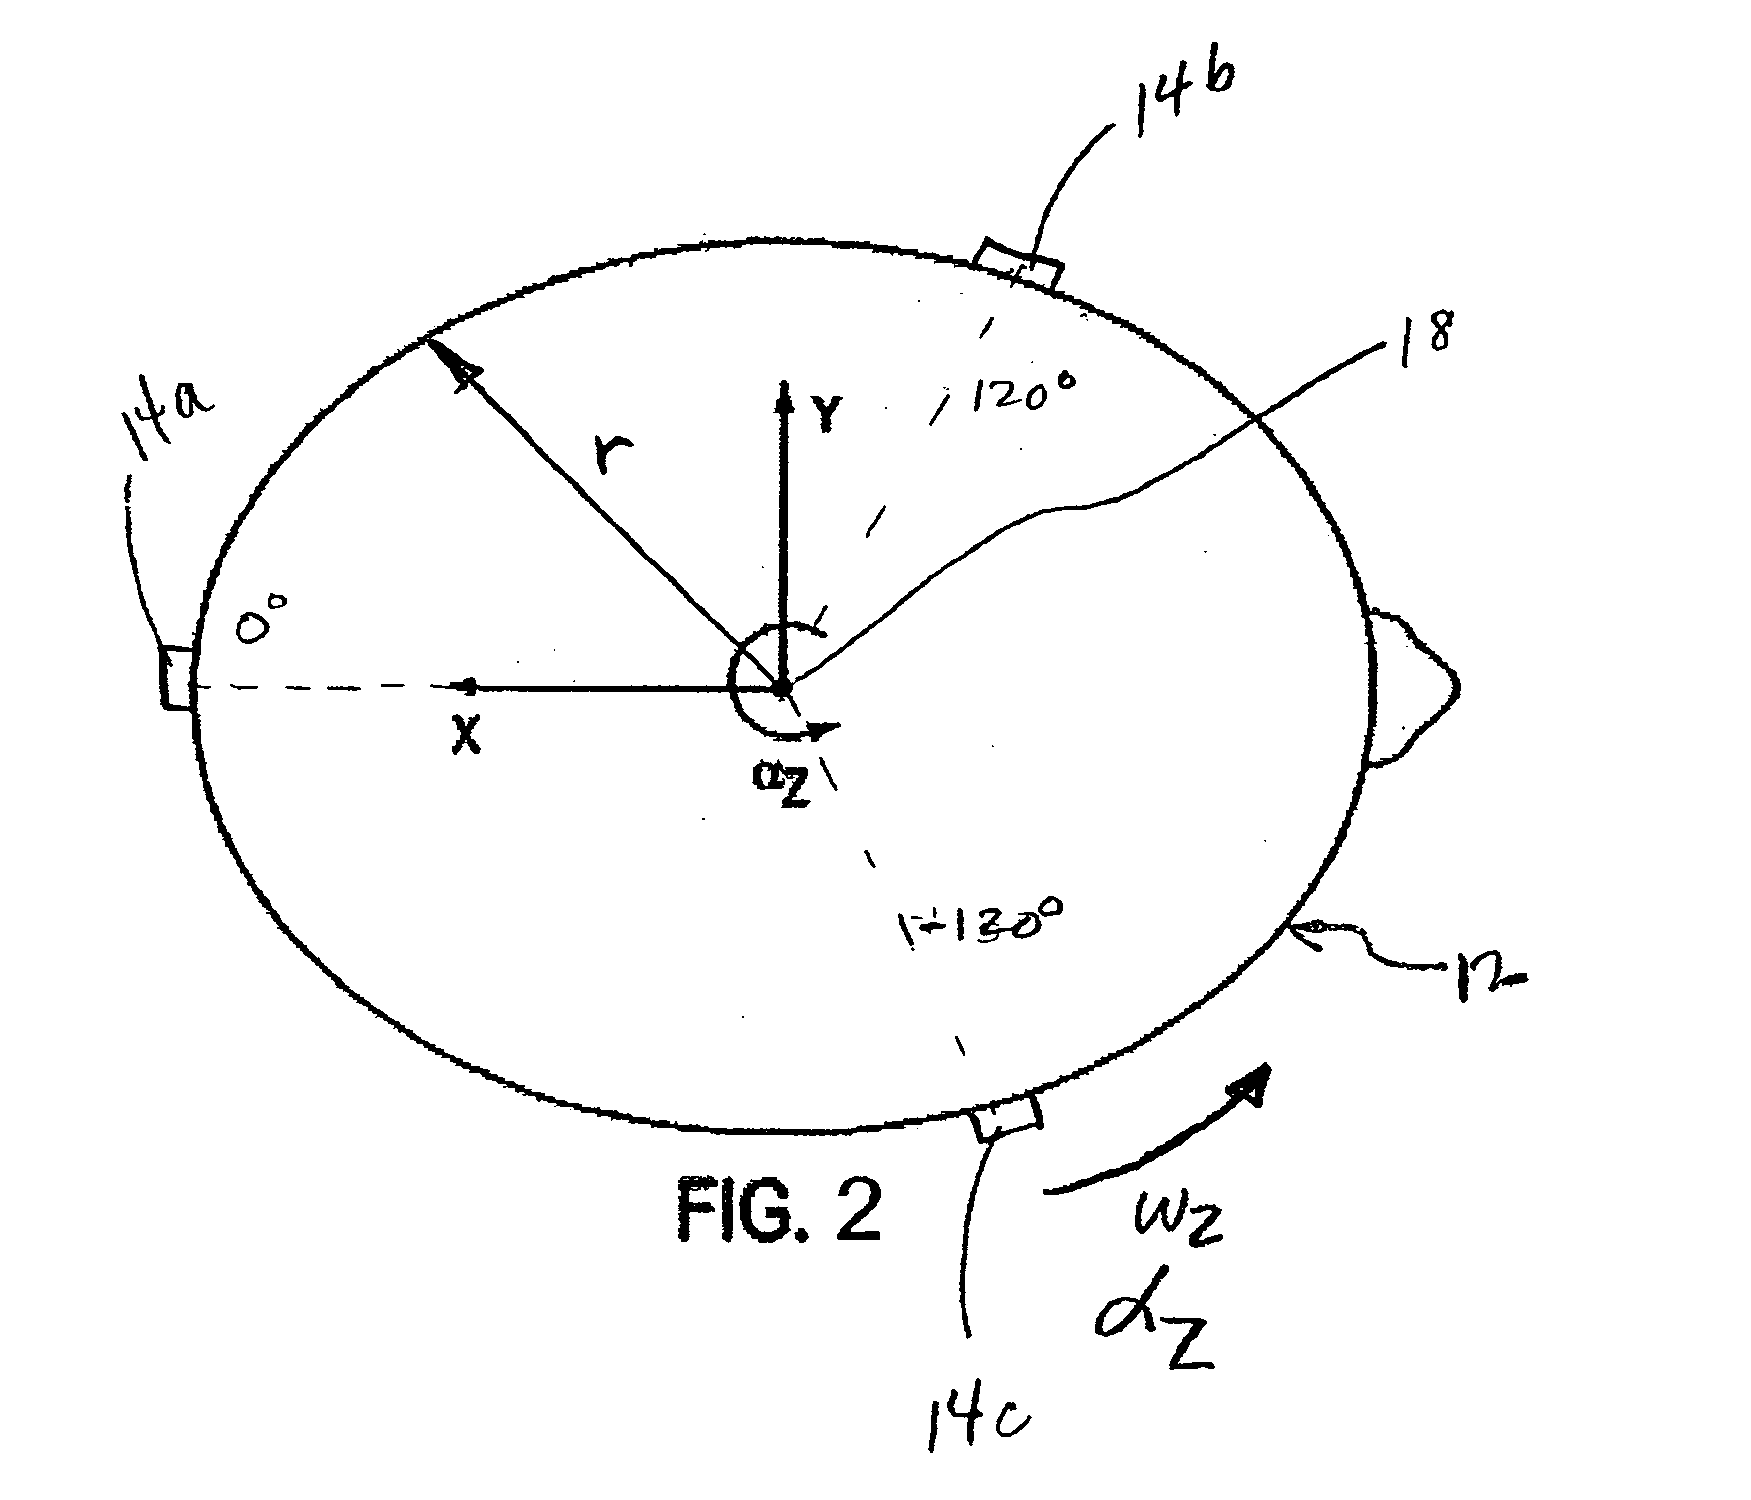 System and method for measuring the linear and rotational acceleration of a body part